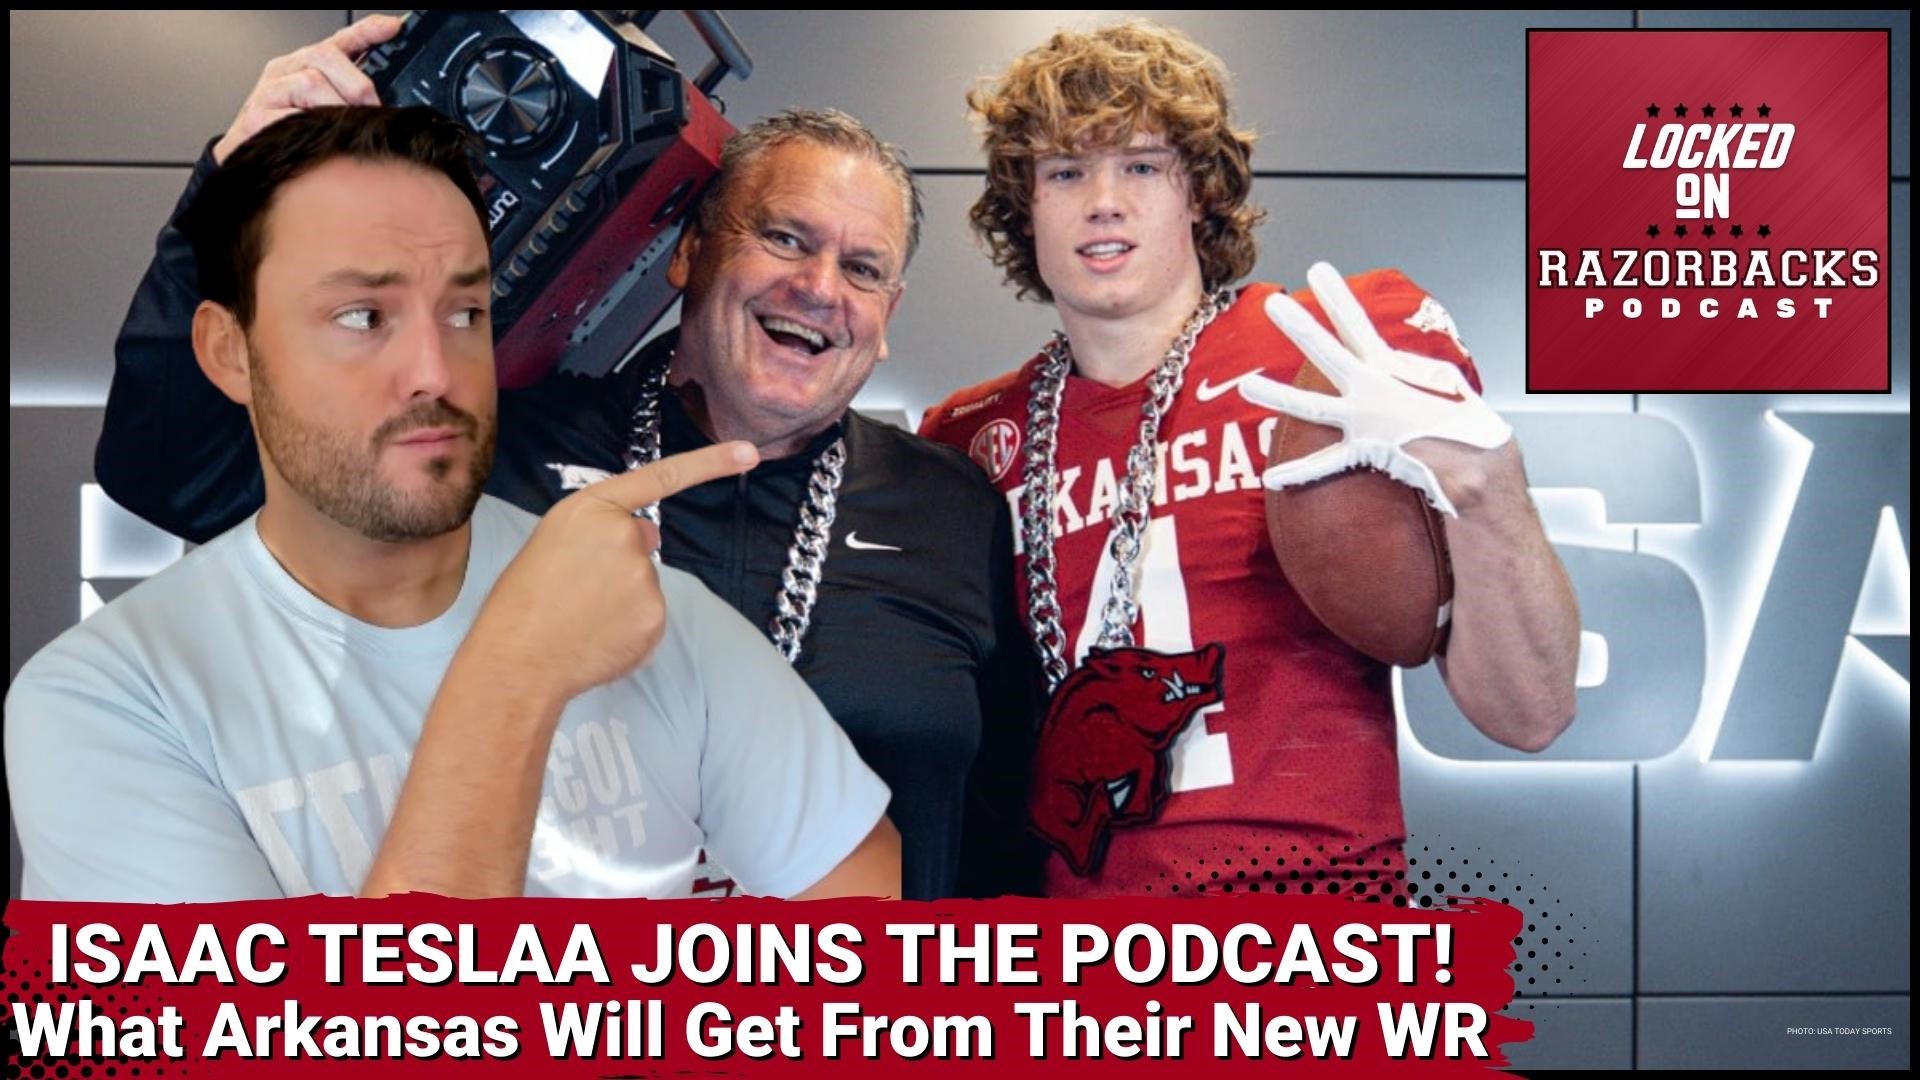 Razorback WR Isaac TeSlaa joins John Nabors as they discuss his journey as a football player thru his collegiate career and why he chose to attend Arkansas.